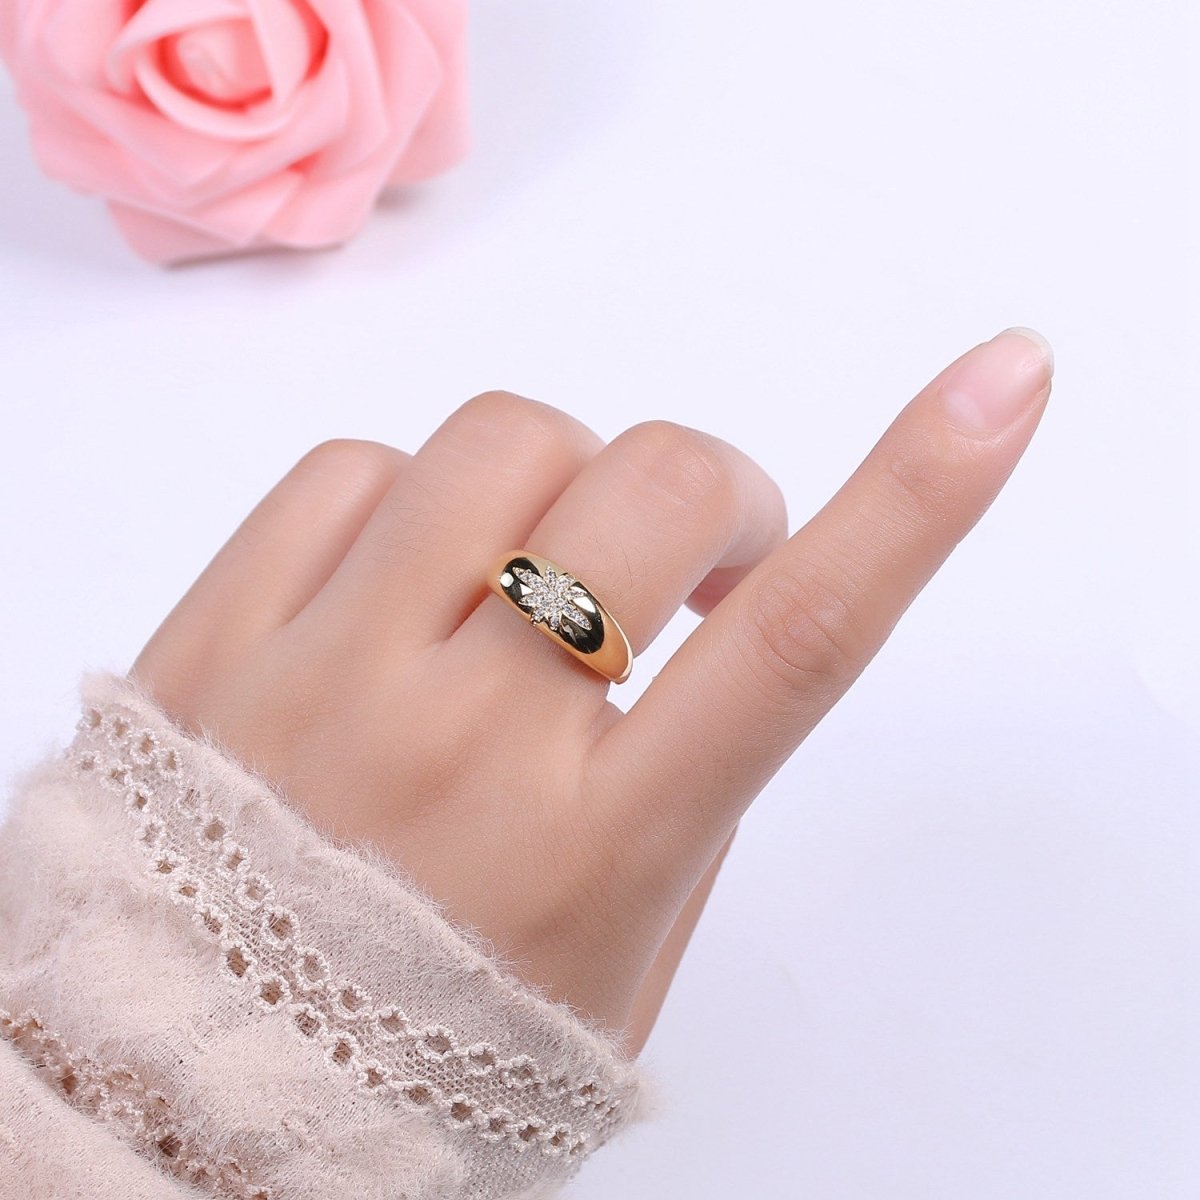 Star Dome Ring, Adjustable Gold Ring, Chunky Ring, Stackable Ring for Statement Jewelry Birthday Gift Idea for Her woman ring S-169 - DLUXCA